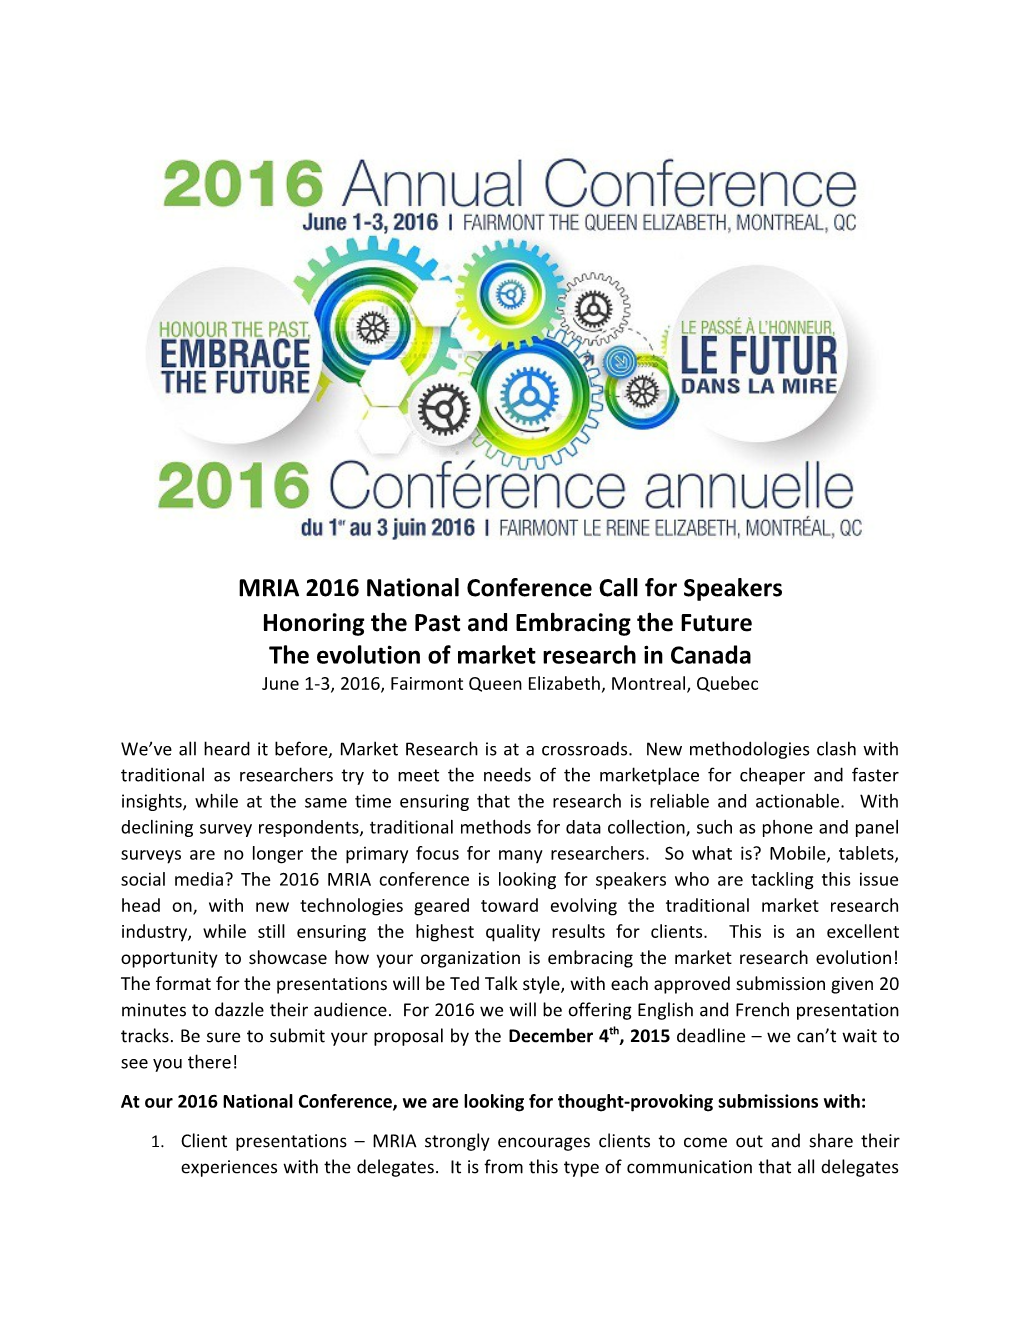 MRIA 2016 National Conference Call for Speakers